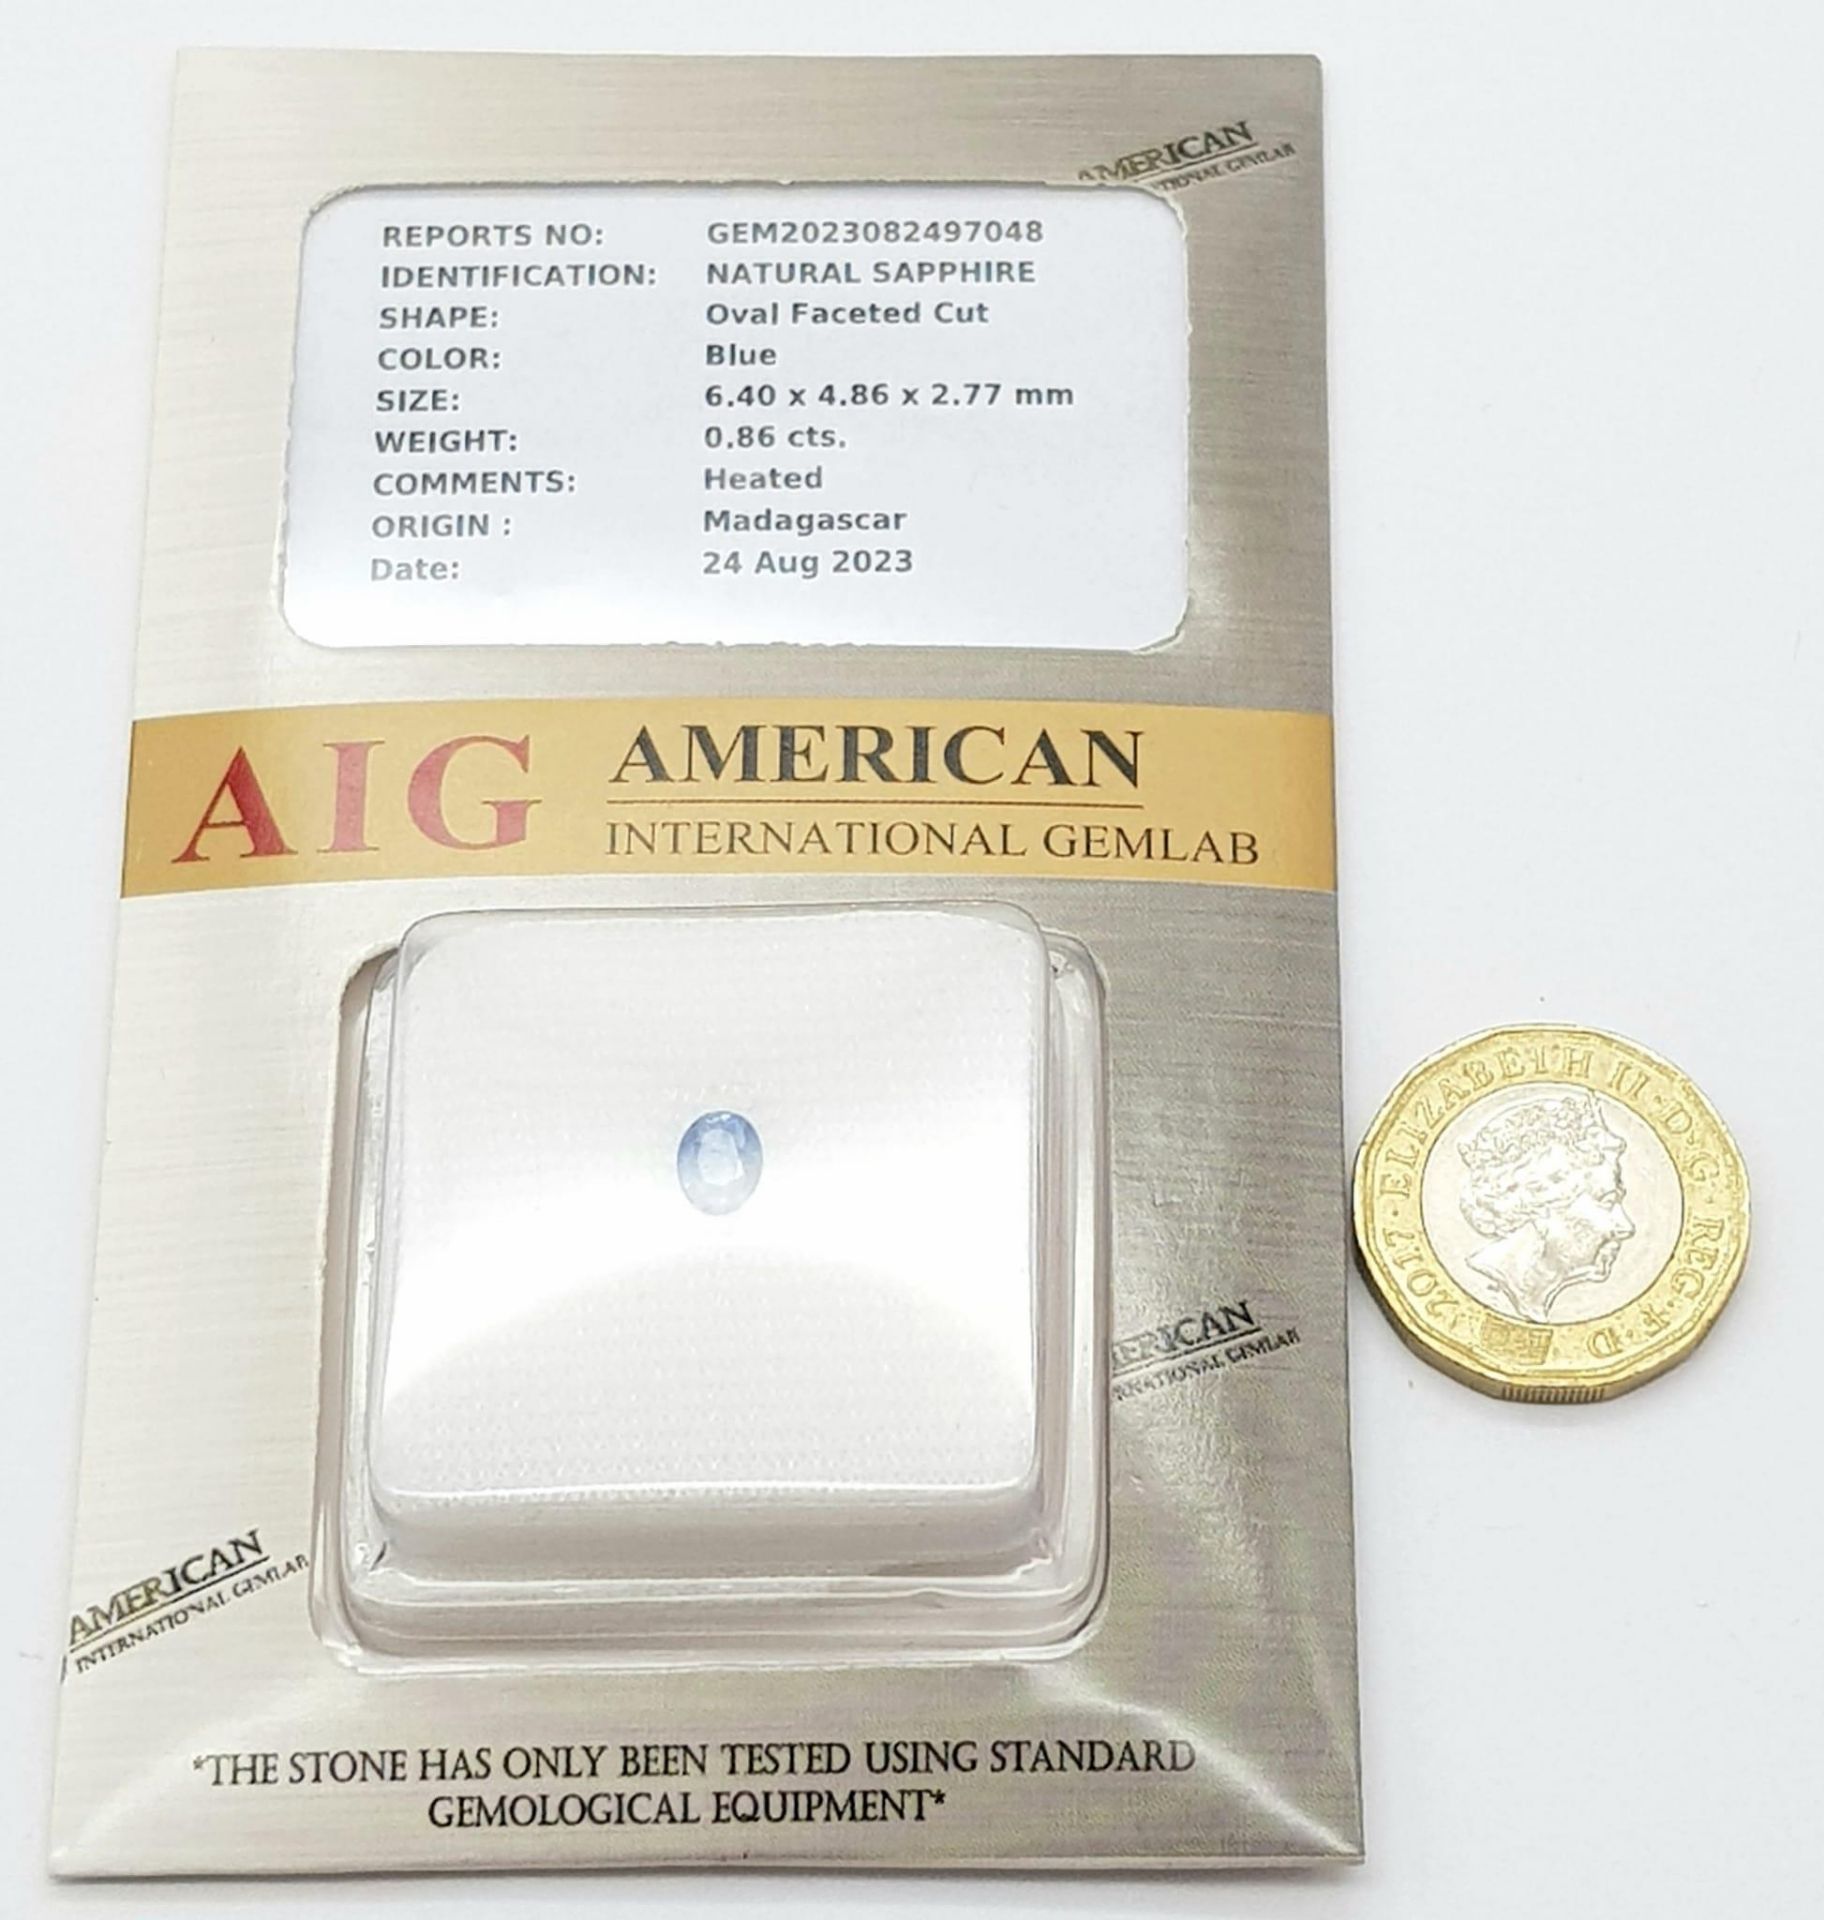 A 0.86ct Madagascan Blue Sapphire - AIG Certified in a sealed box. - Image 3 of 5